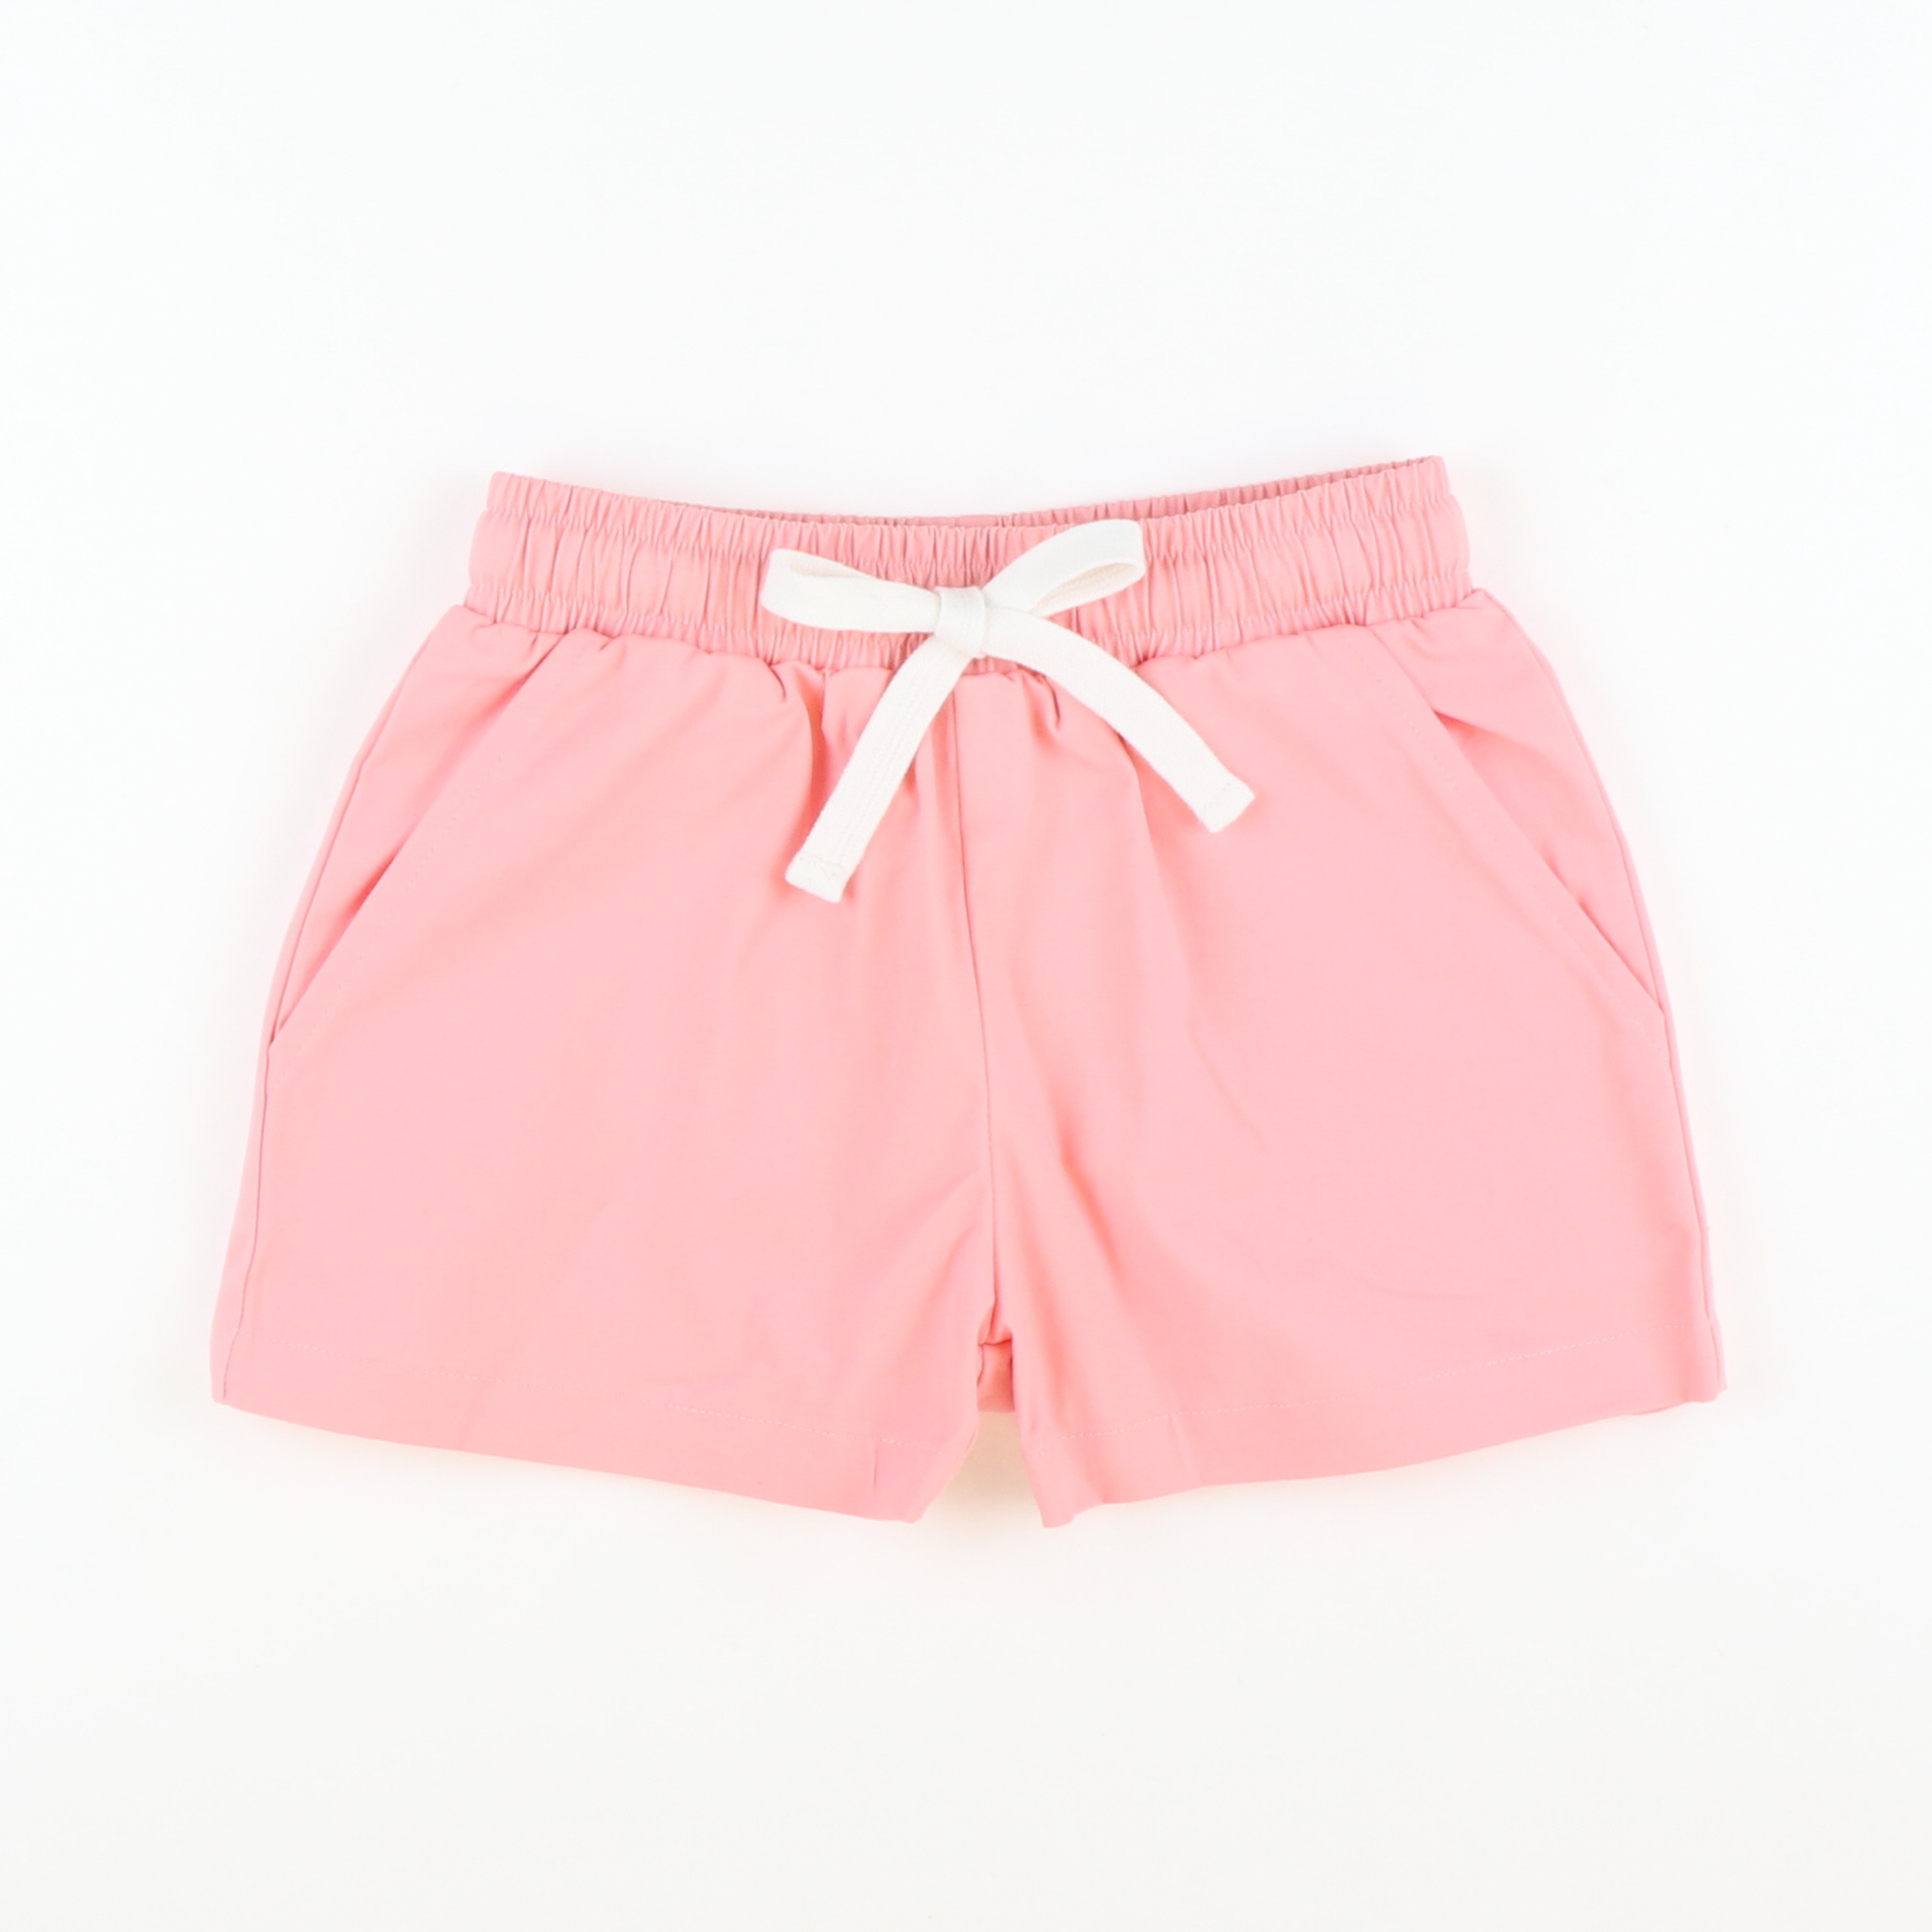 Boys Signature Twill Shorts - Pink - Stellybelly